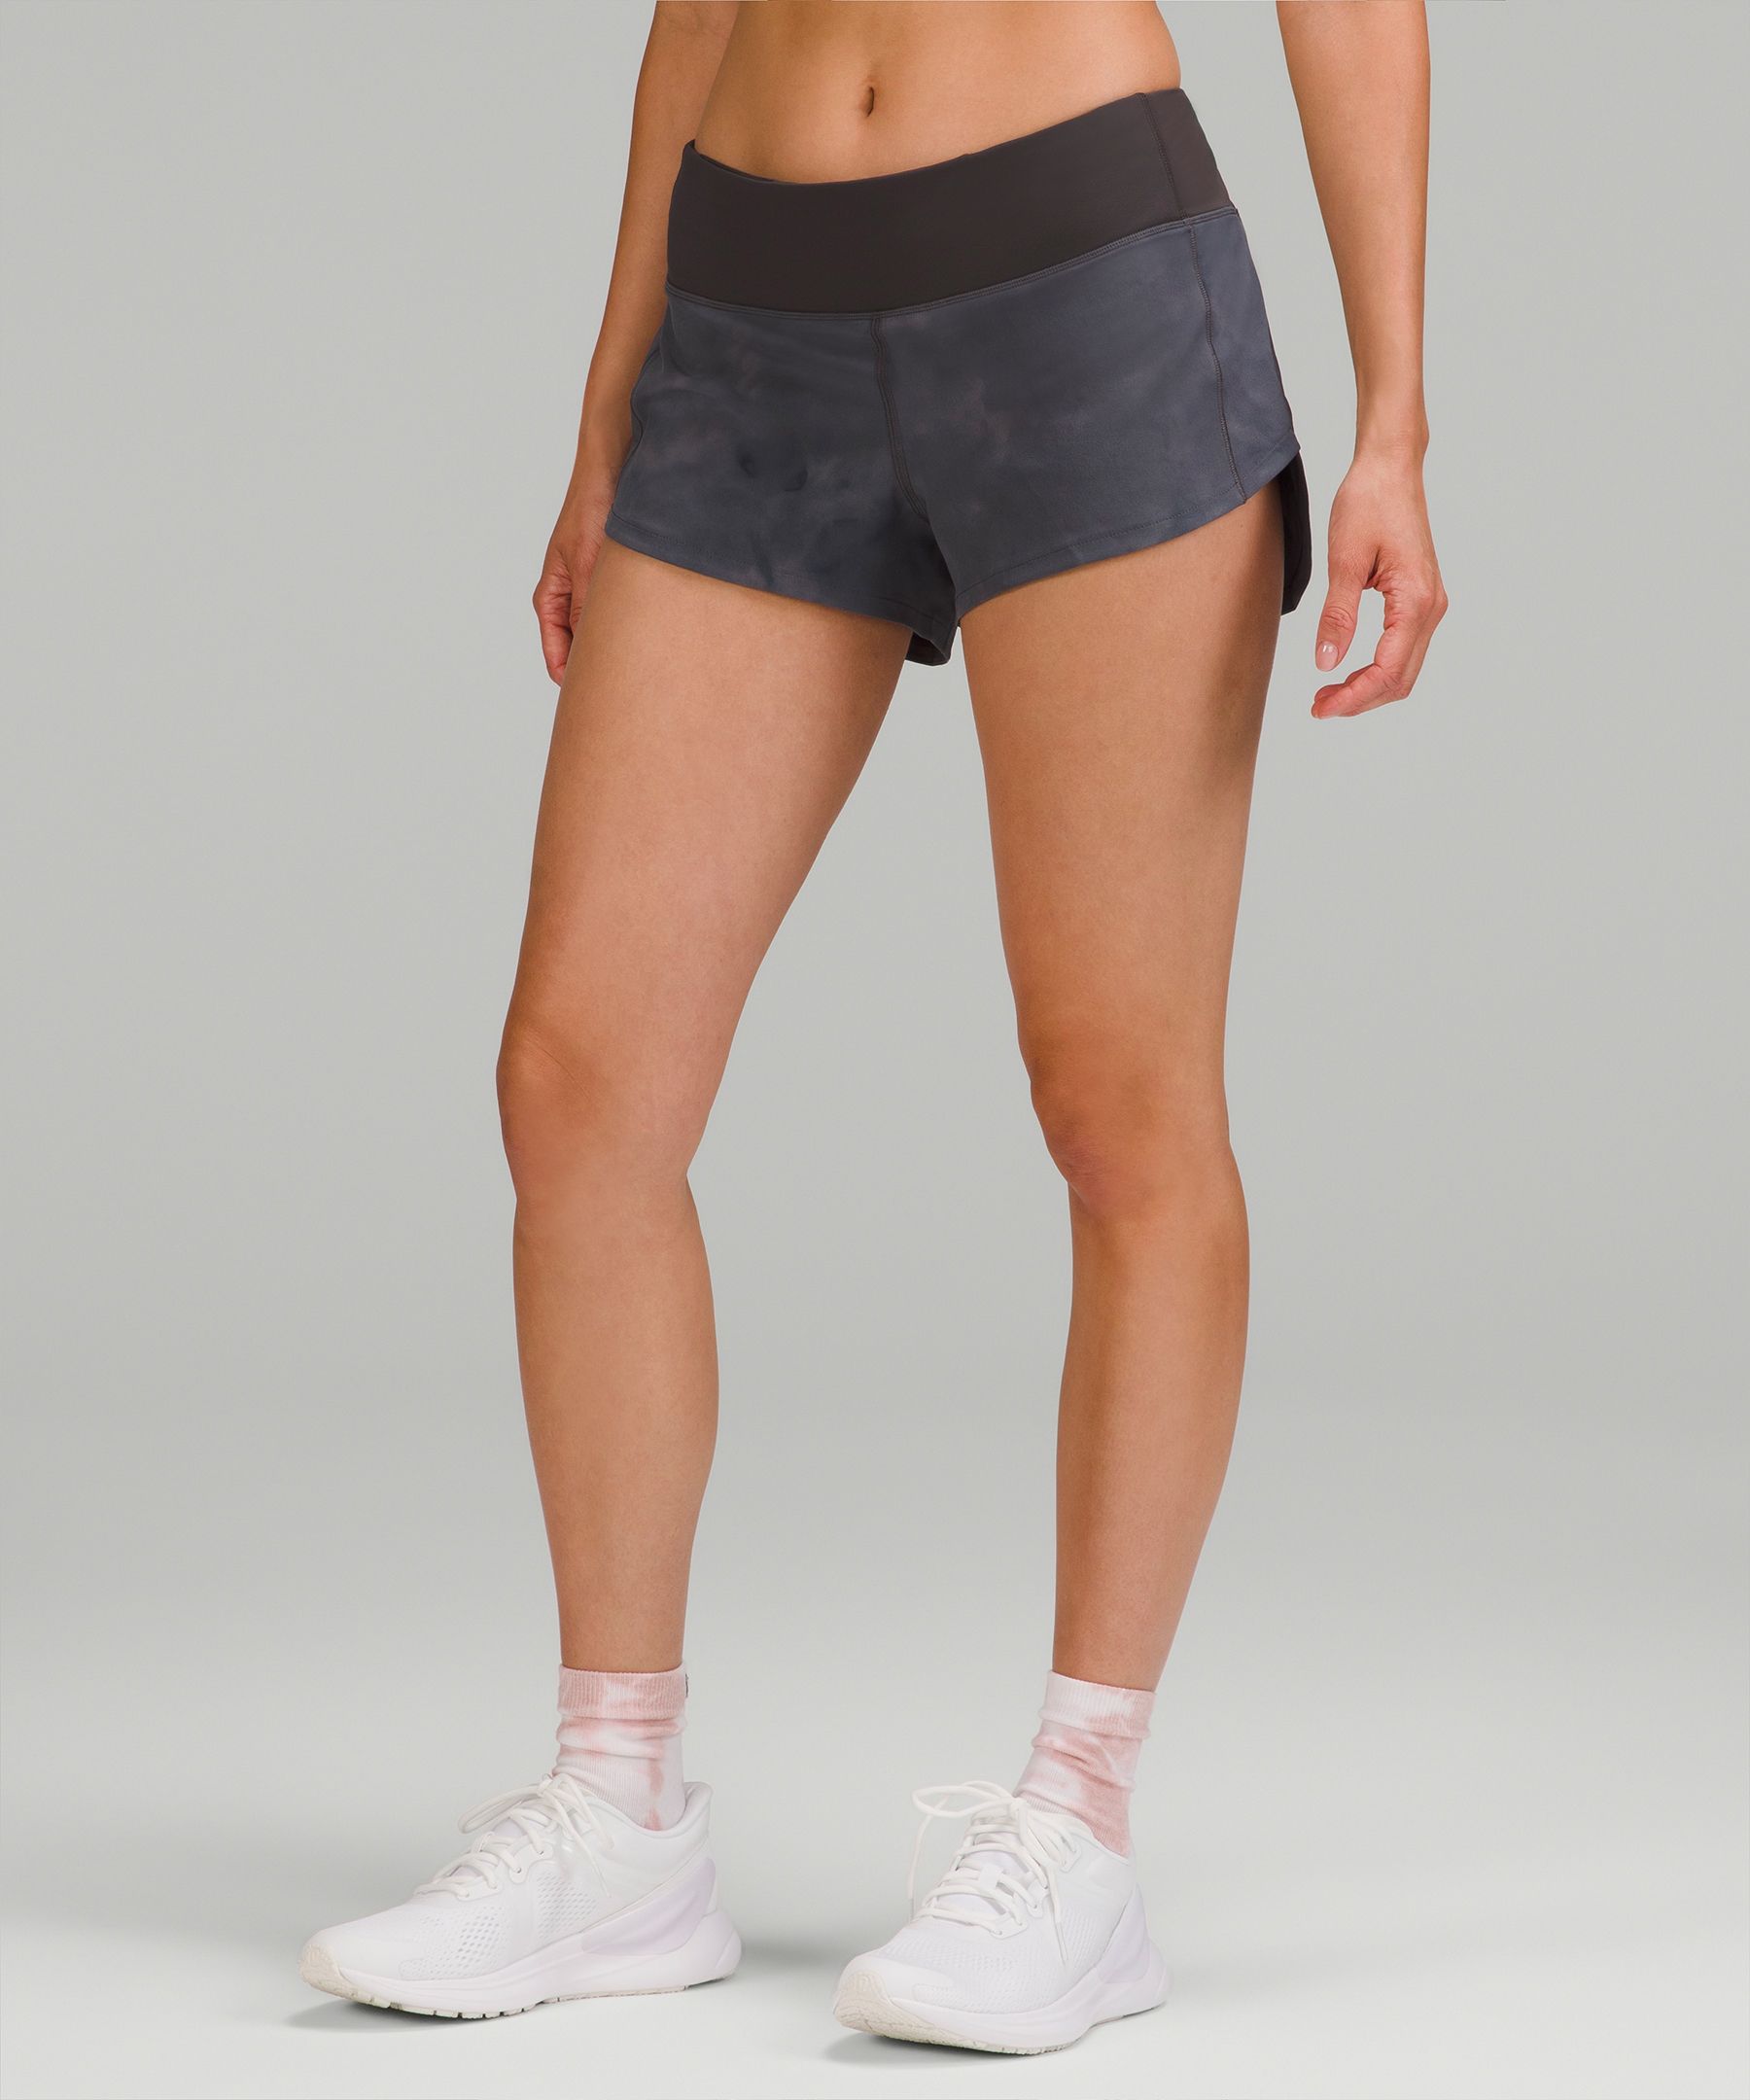 Lululemon Speed Up Low-rise Lined Shorts 2.5" In Black